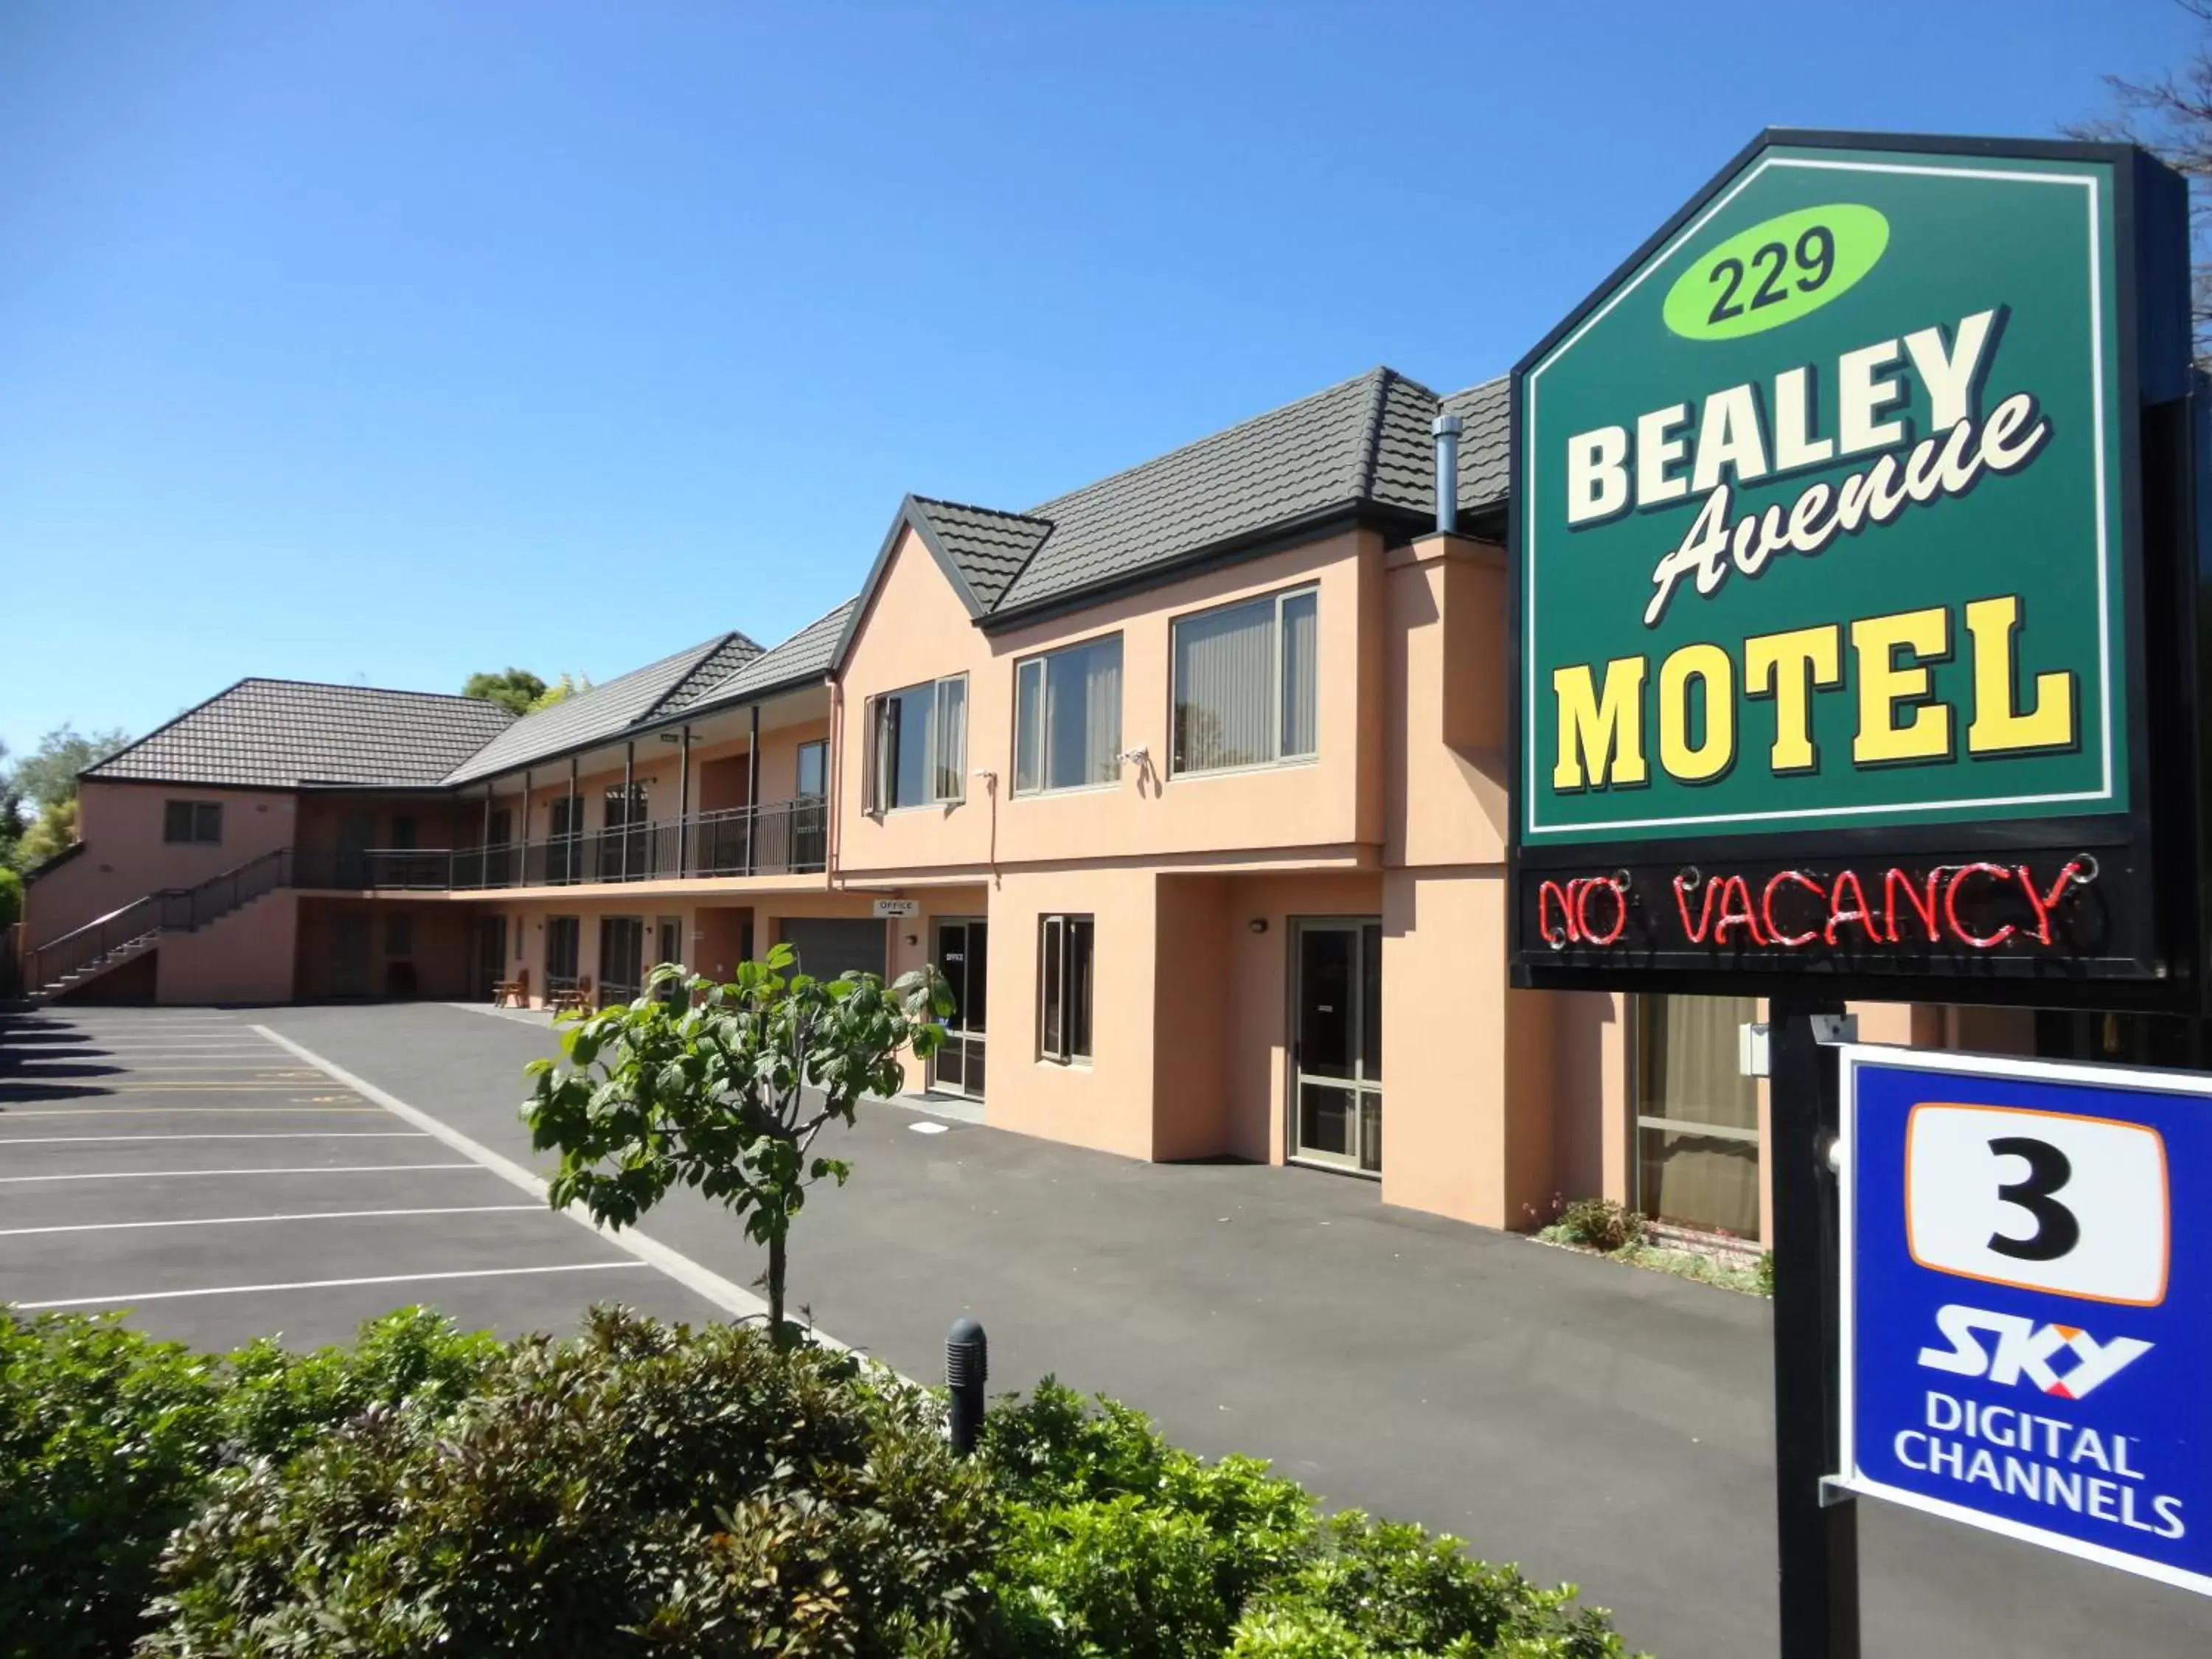 Property Building in Bealey Avenue Motel